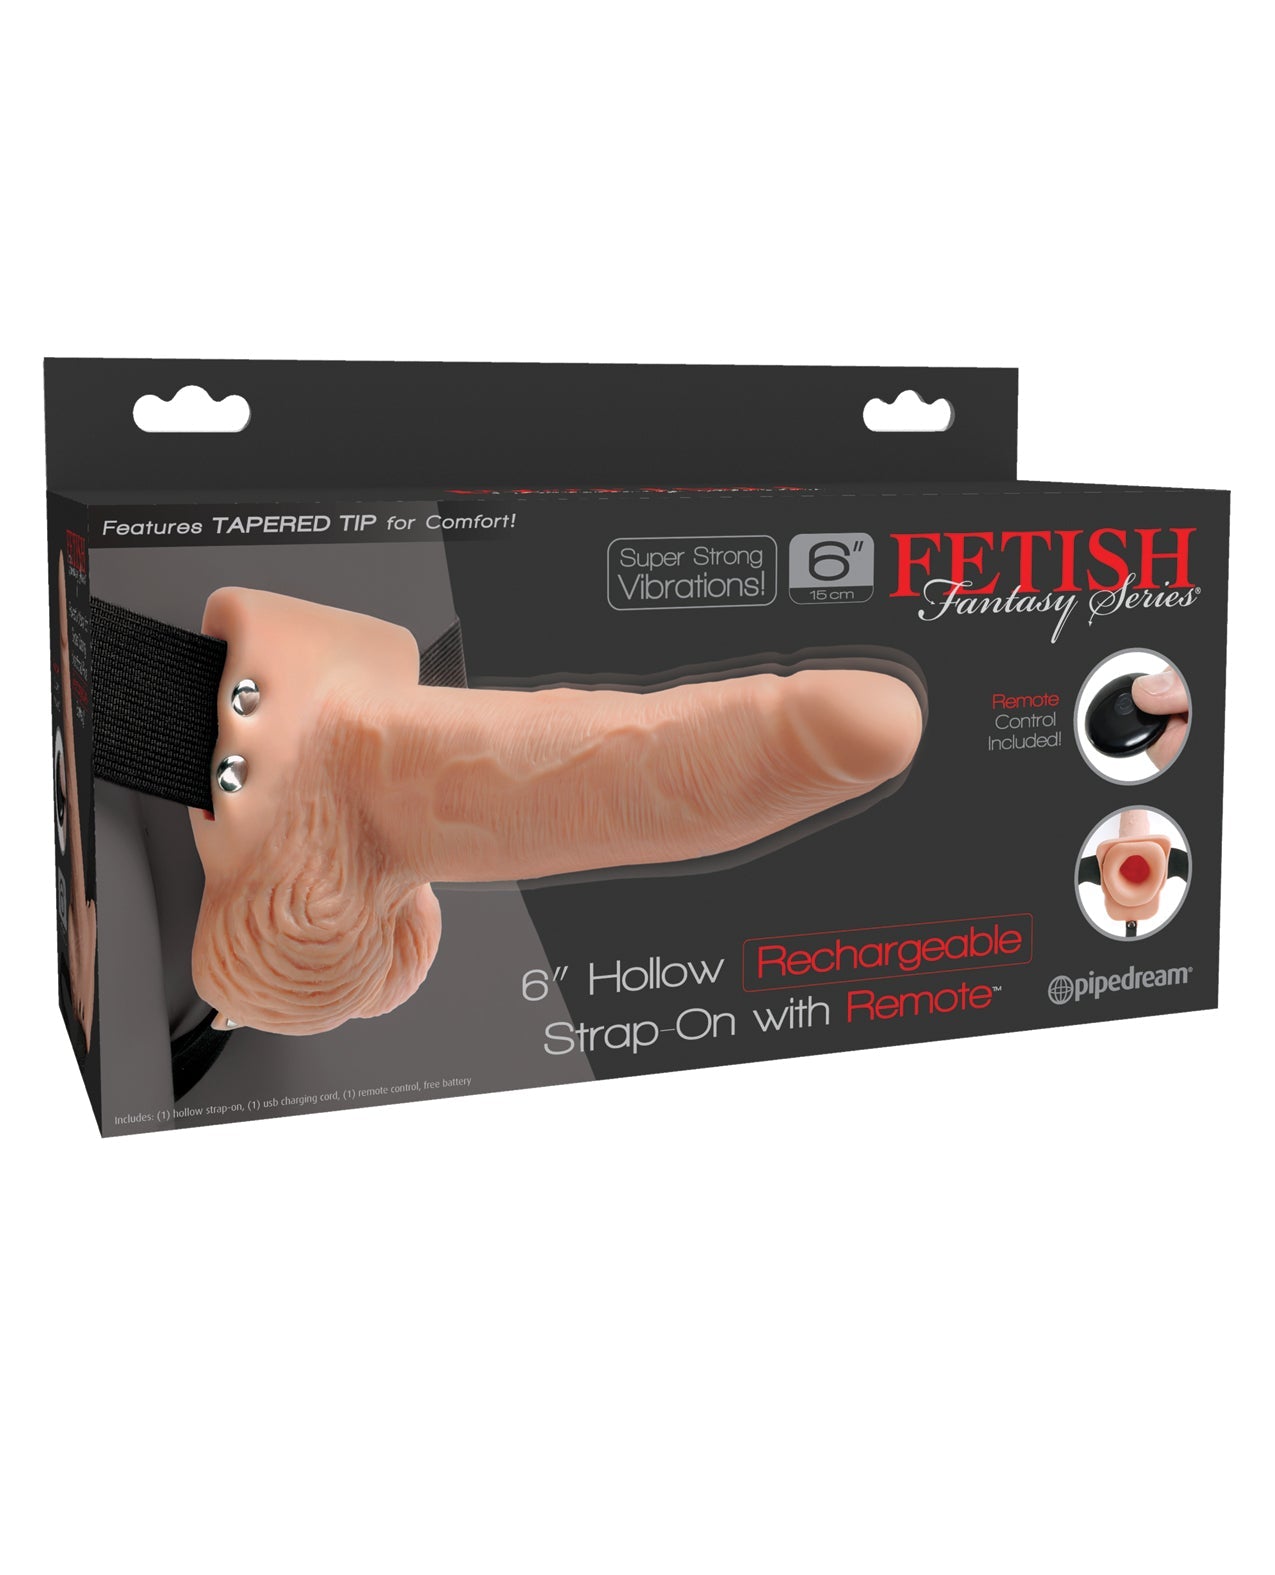 Fetish Fantasy Series 6&quot; Hollow Rechargeable Strap On w/Remote - Flesh